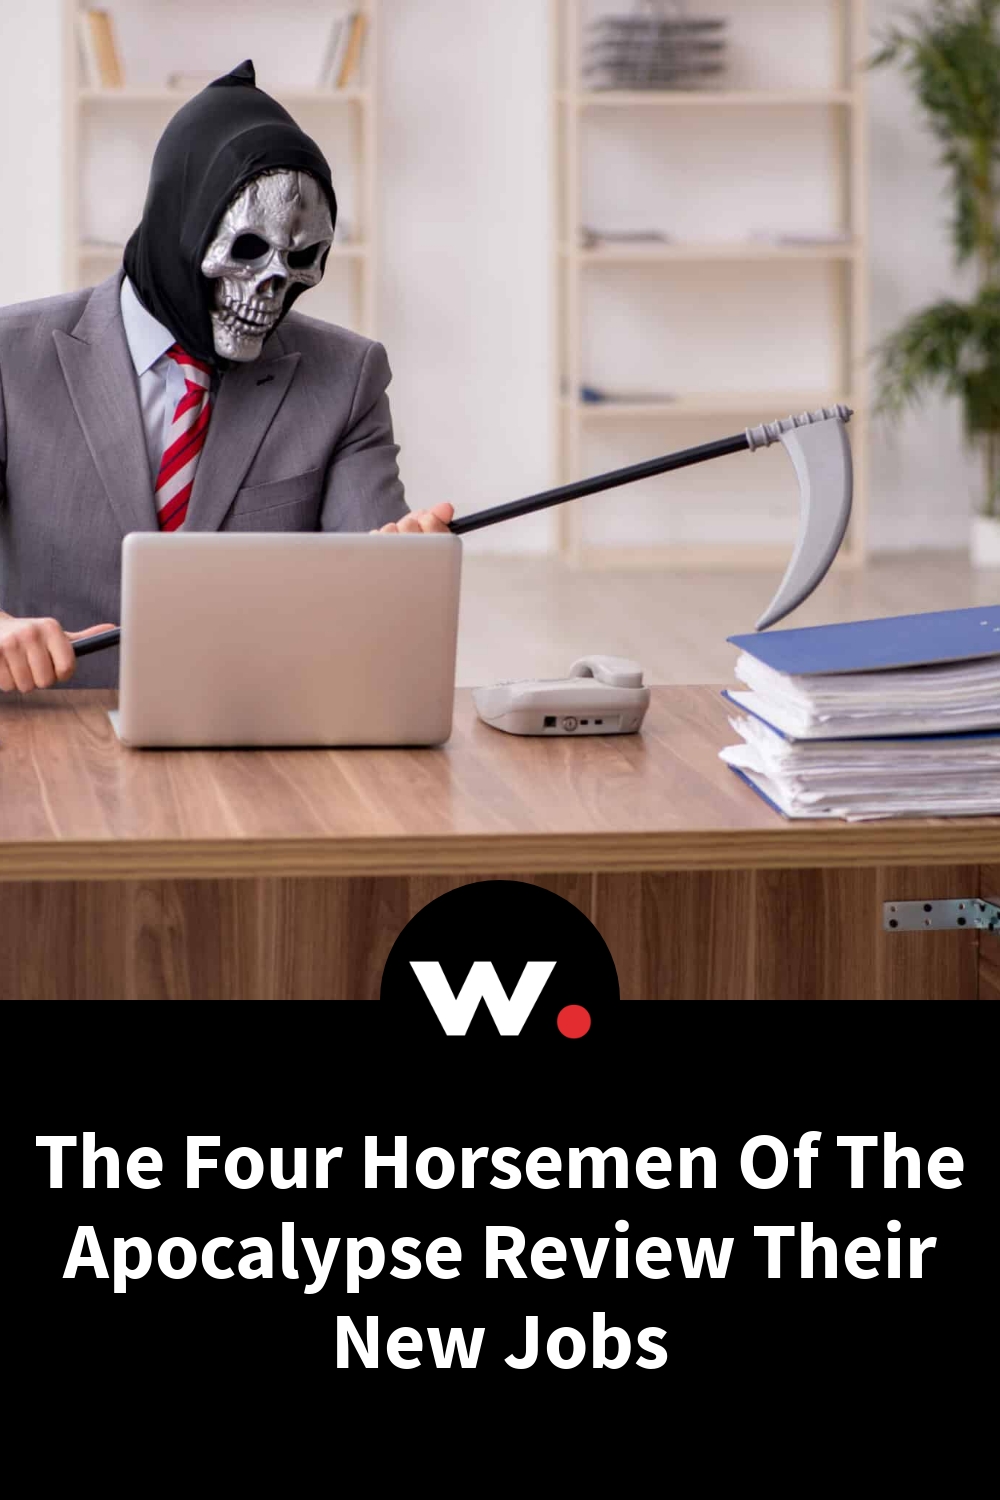 The Four Horsemen Of The Apocalypse Review Their New Jobs